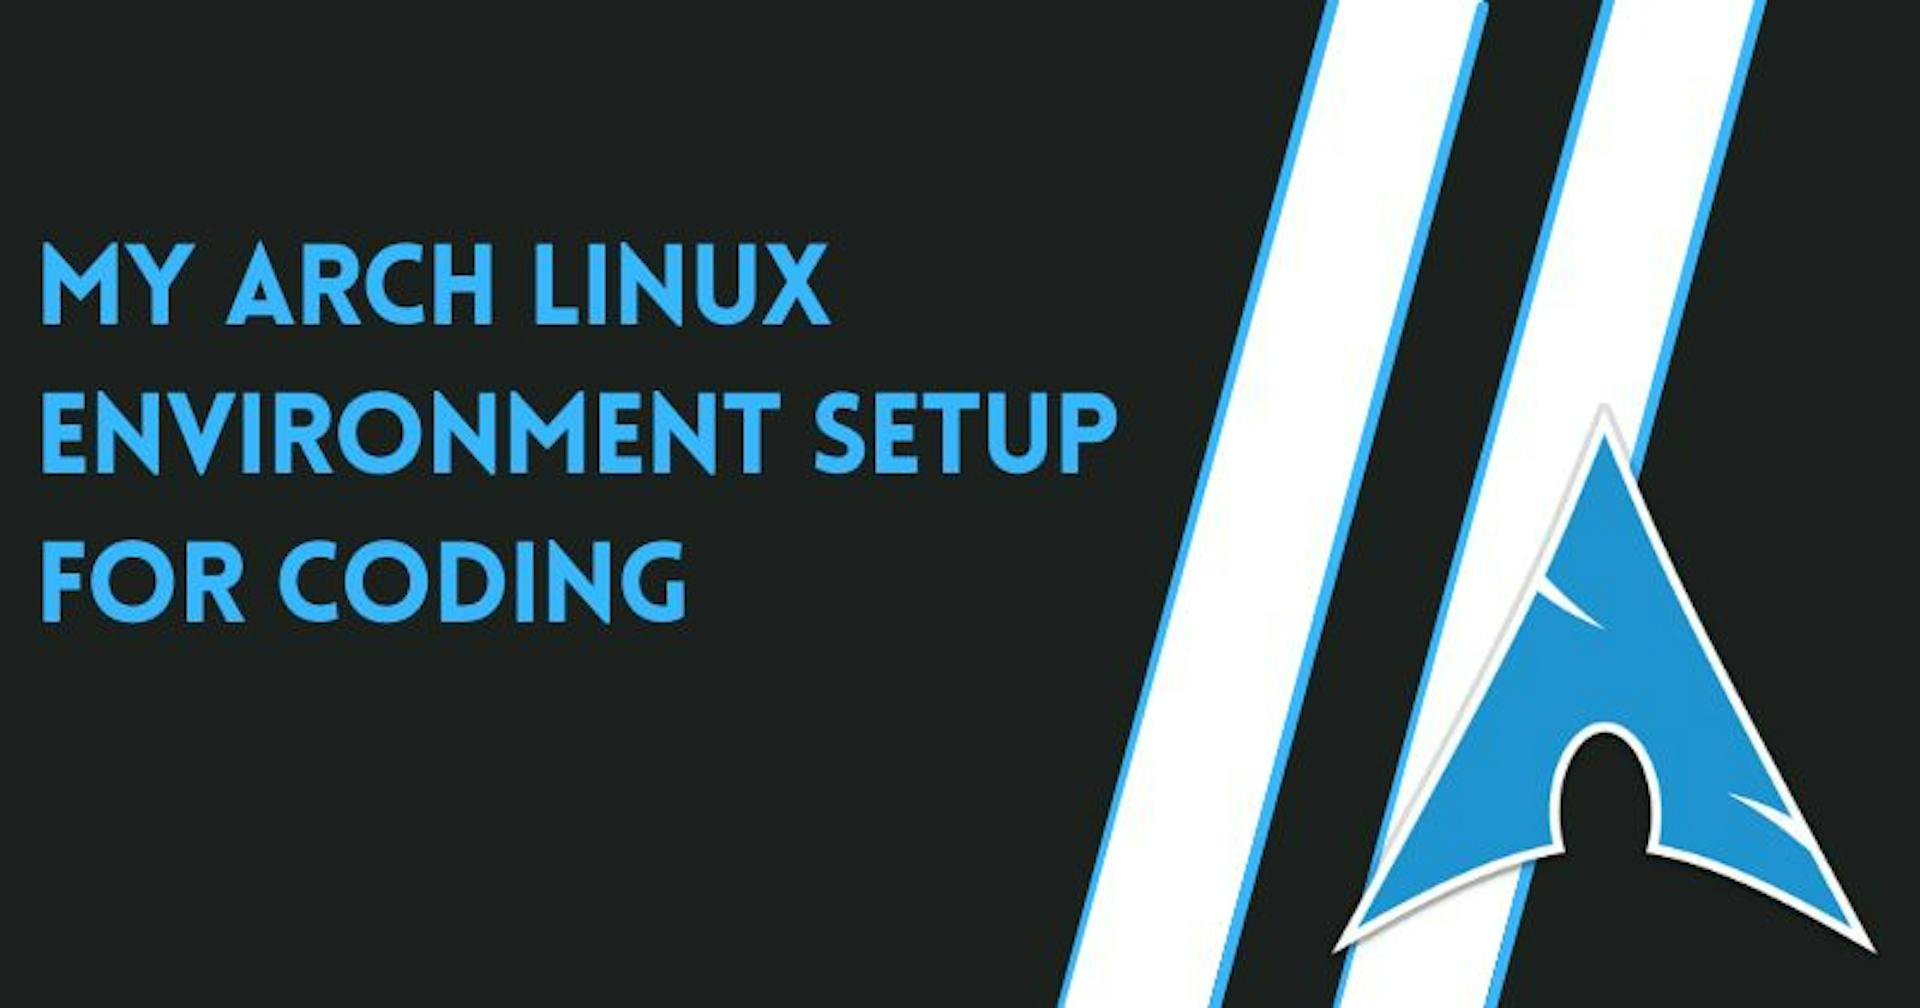 featured image - How to Setup an Arch Linux Environment for Coding